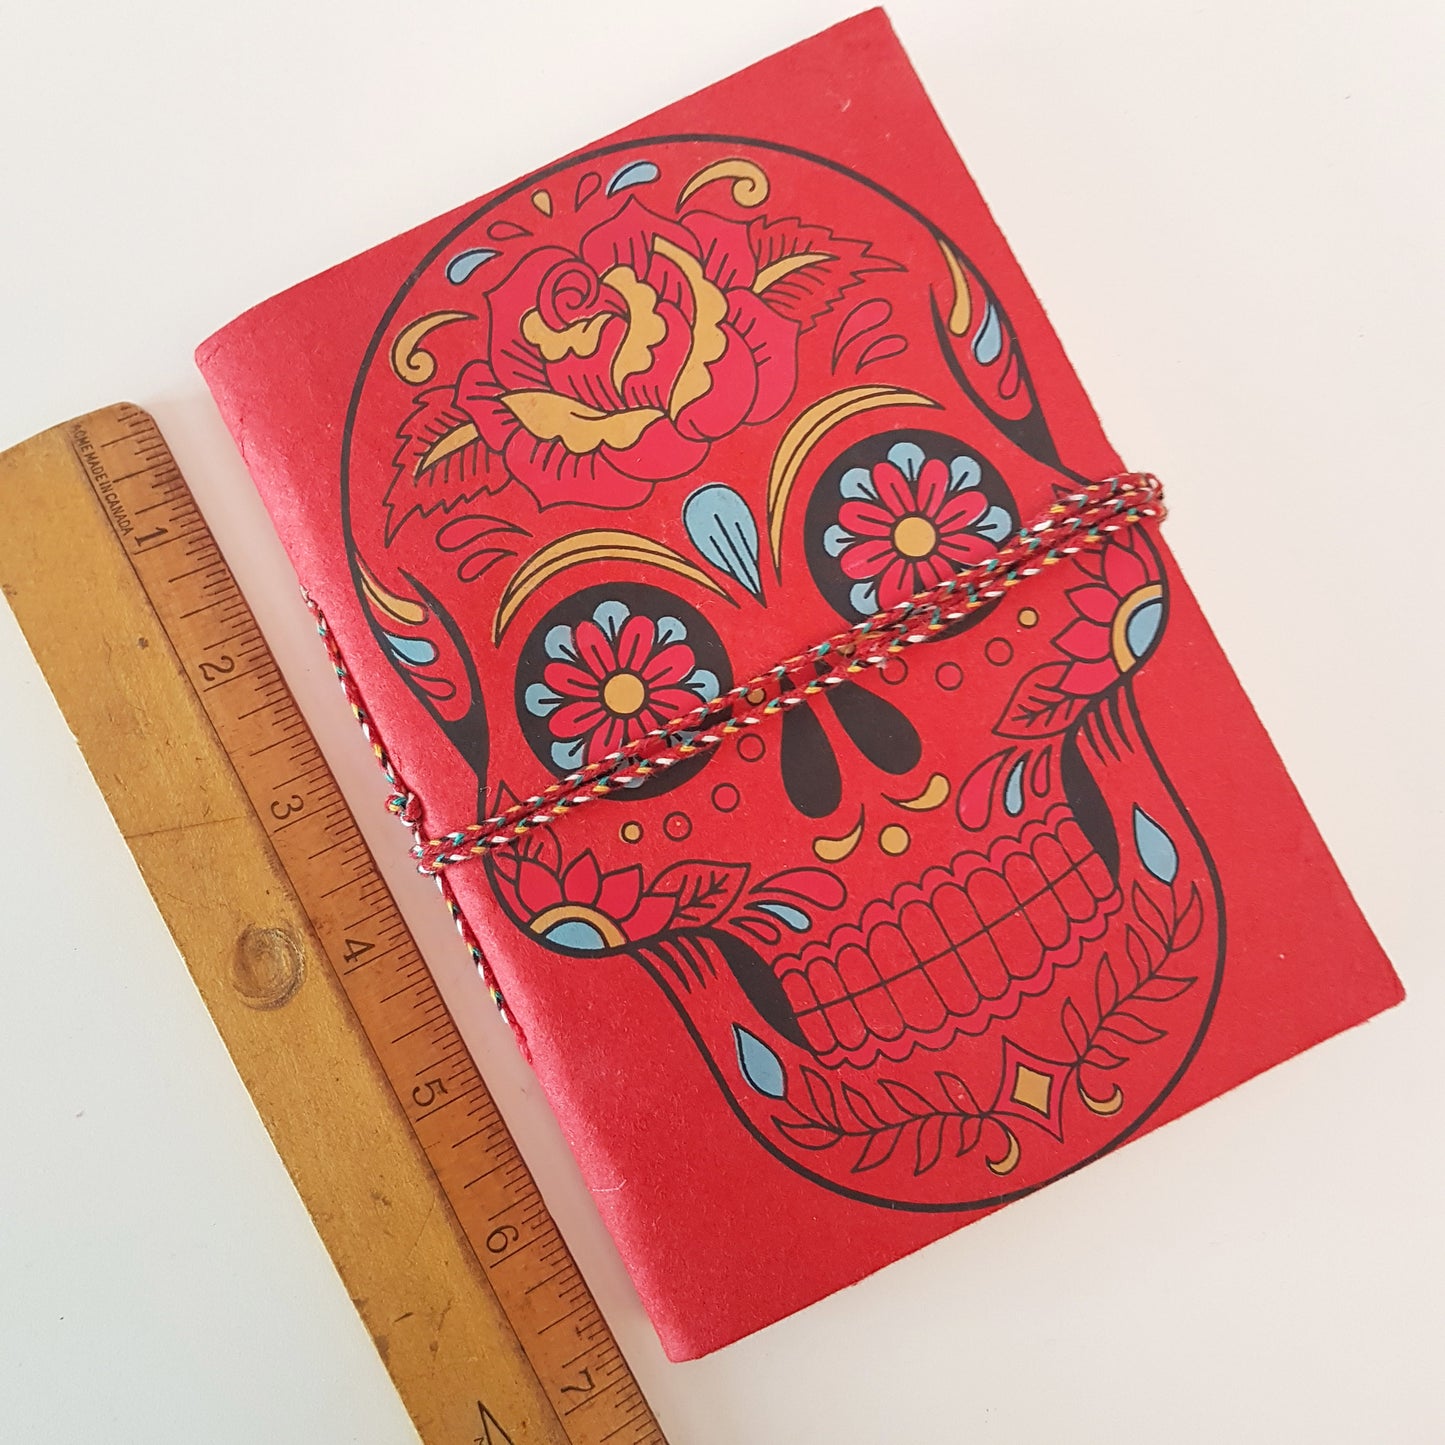 Red skull sketchbook jotter journal 5 by 7 inches with blank artisan paper pages. Colorful gothic day of the dead sugarskull design diary in red.